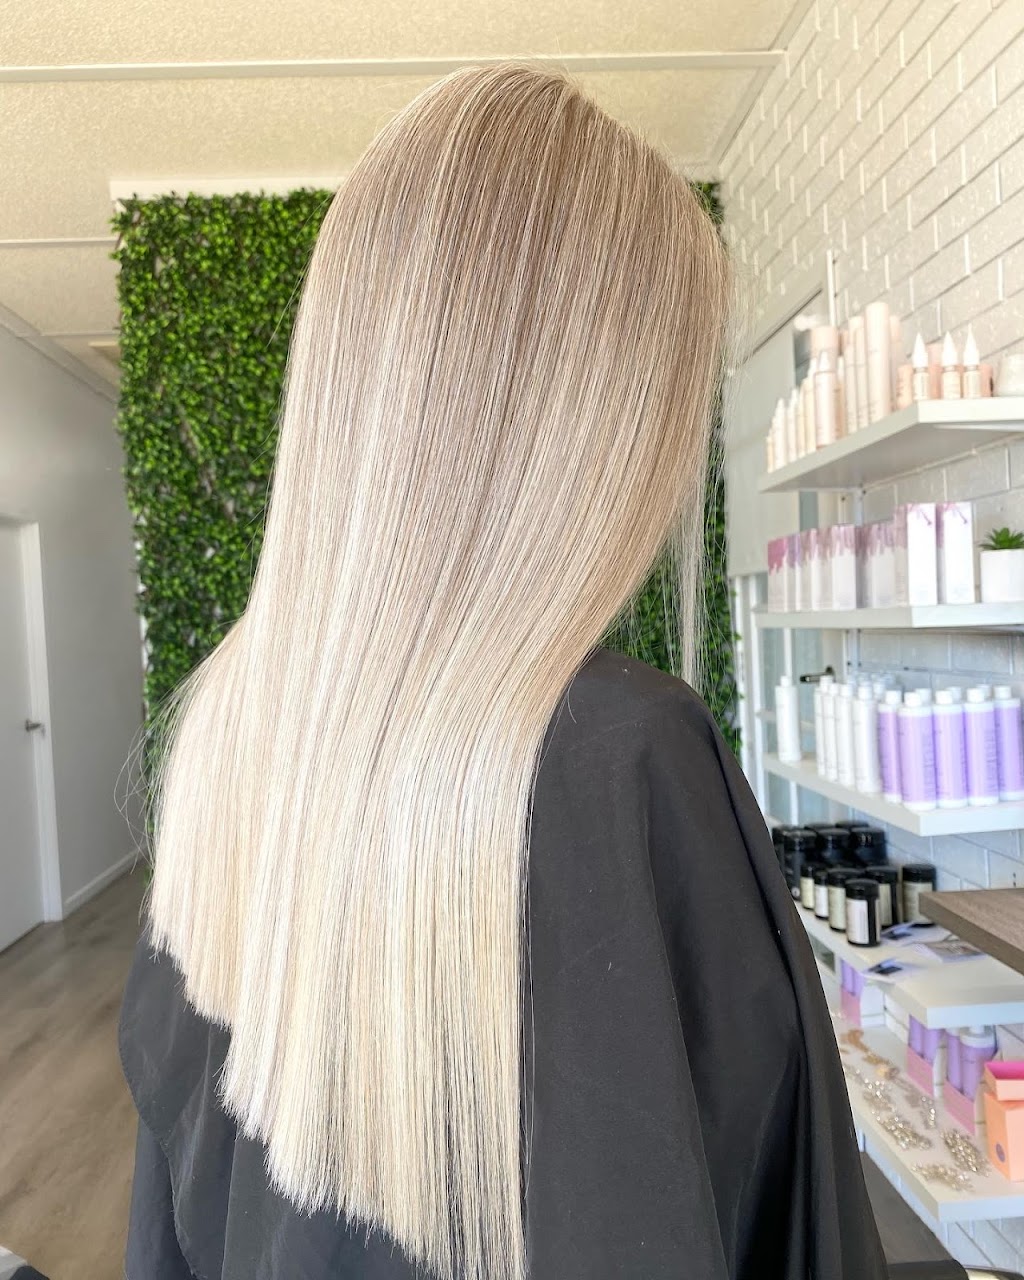 Hair By Millie Holland | hair care | 128-132 Campbell St, Swan Hill VIC 3585, Australia | 0400412777 OR +61 400 412 777